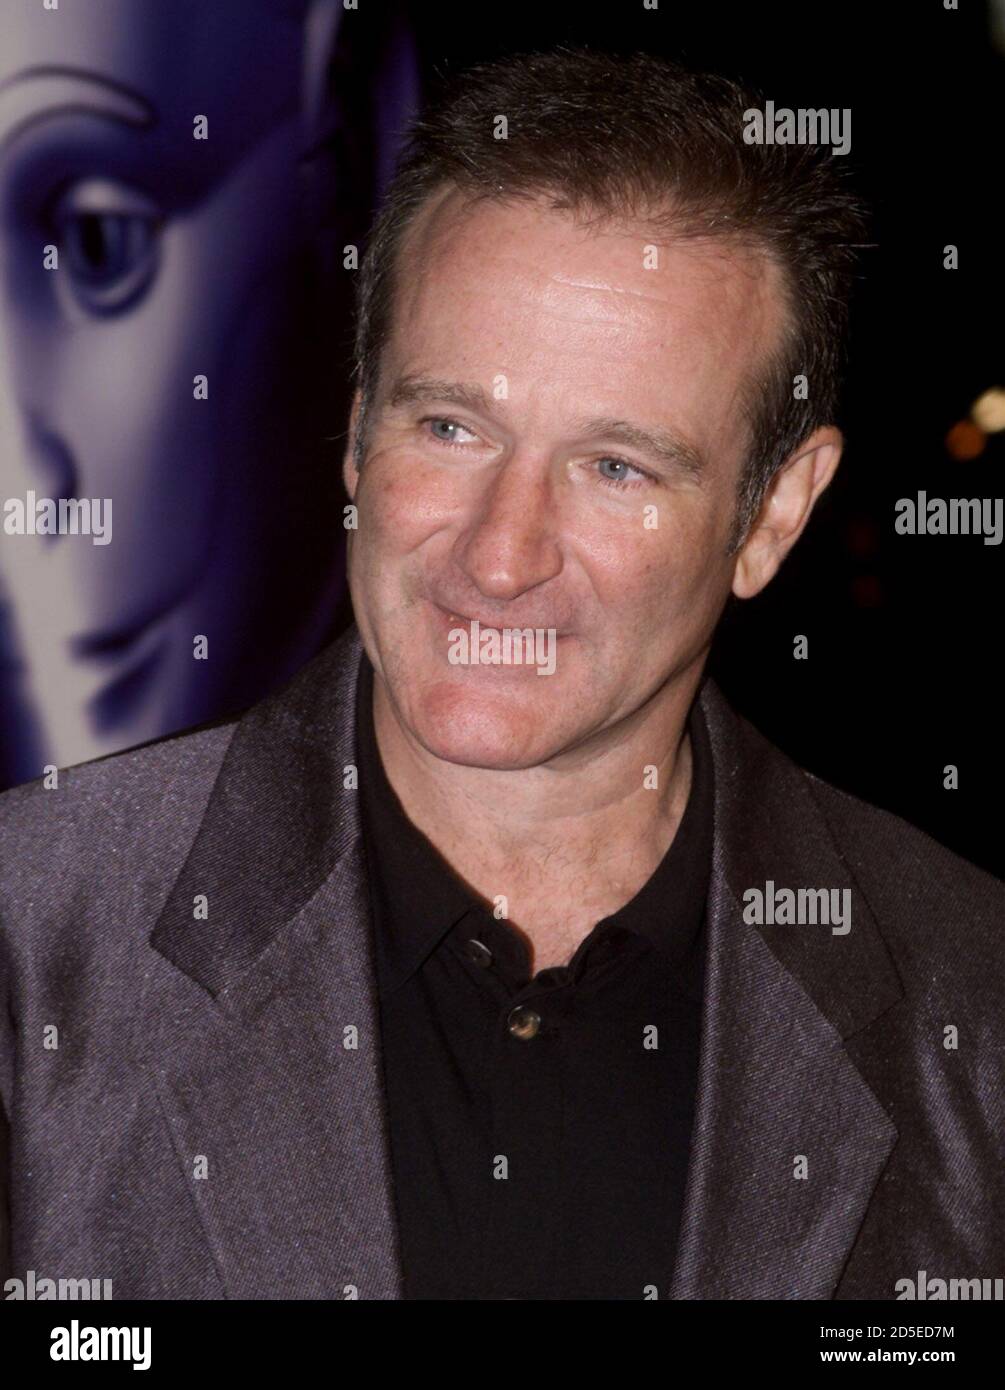 Actor Robin Williams poses at the premiere of the new film "Bicentennial  Man" December 13 in Hollywood. The film is about a futuristic family and  their personal robot and opens December 17